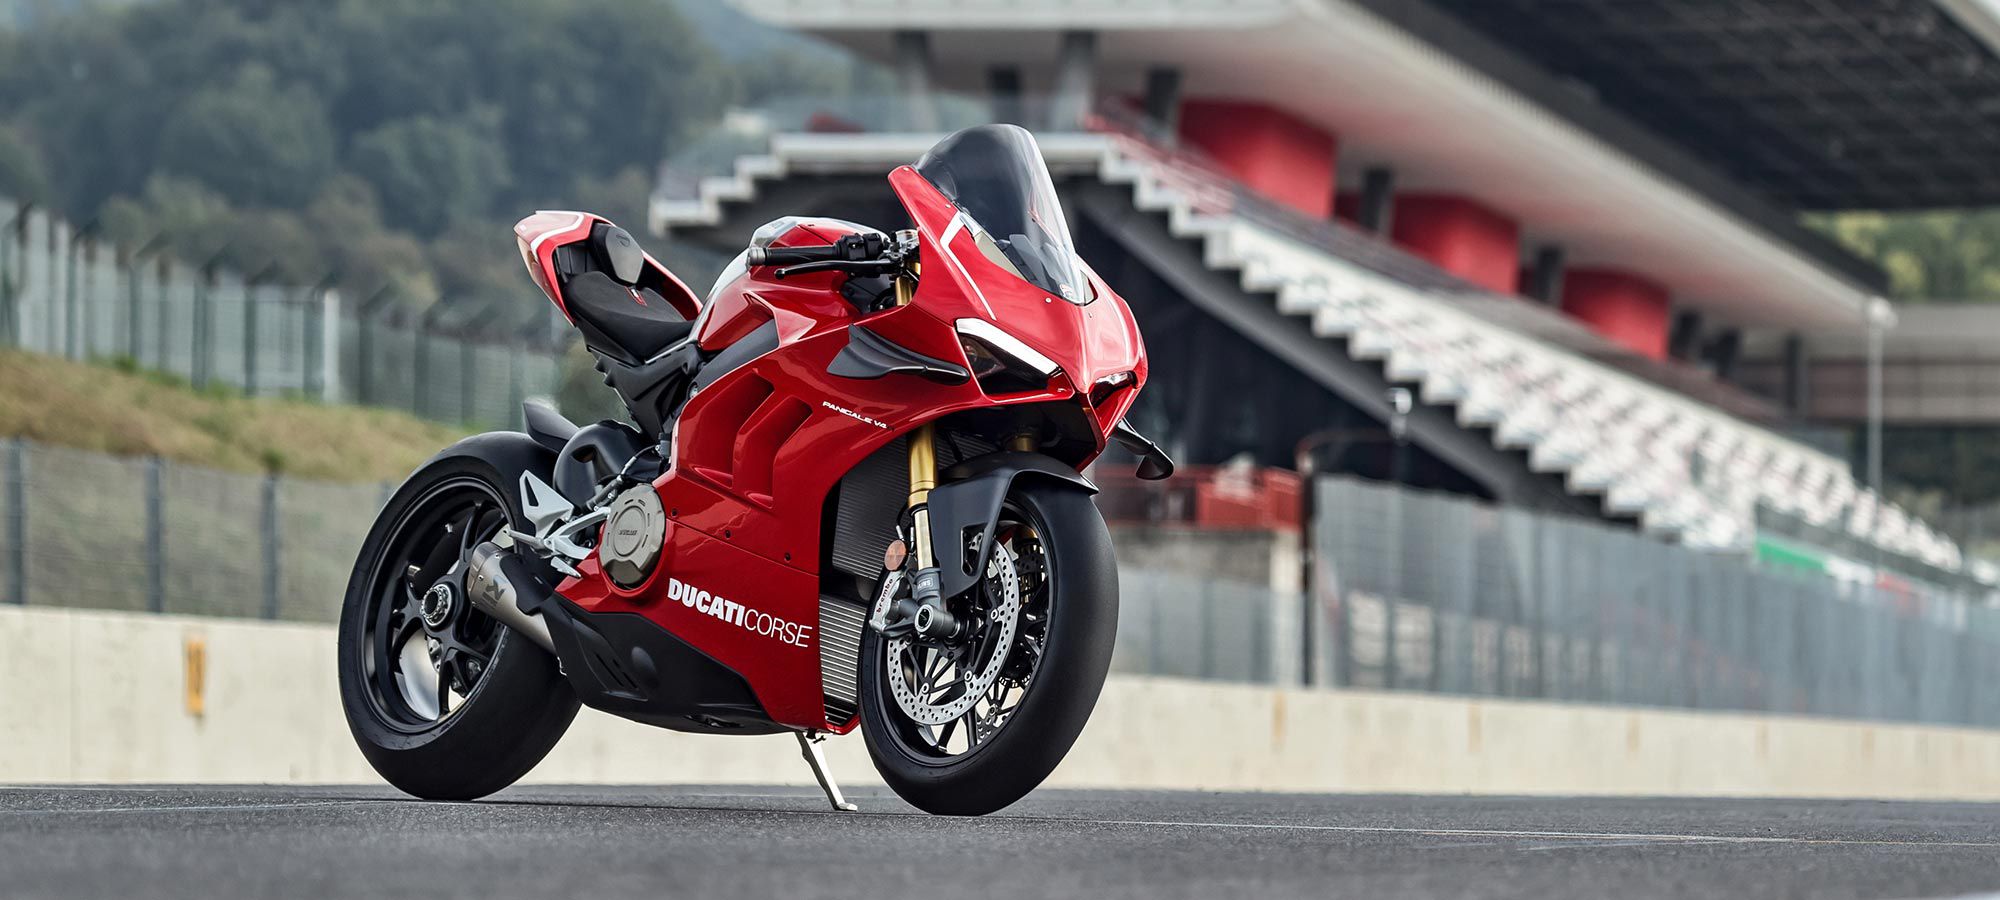 The 19 Ducati Panigale V4 R Is A 221 Horsepower Beast Cycle World